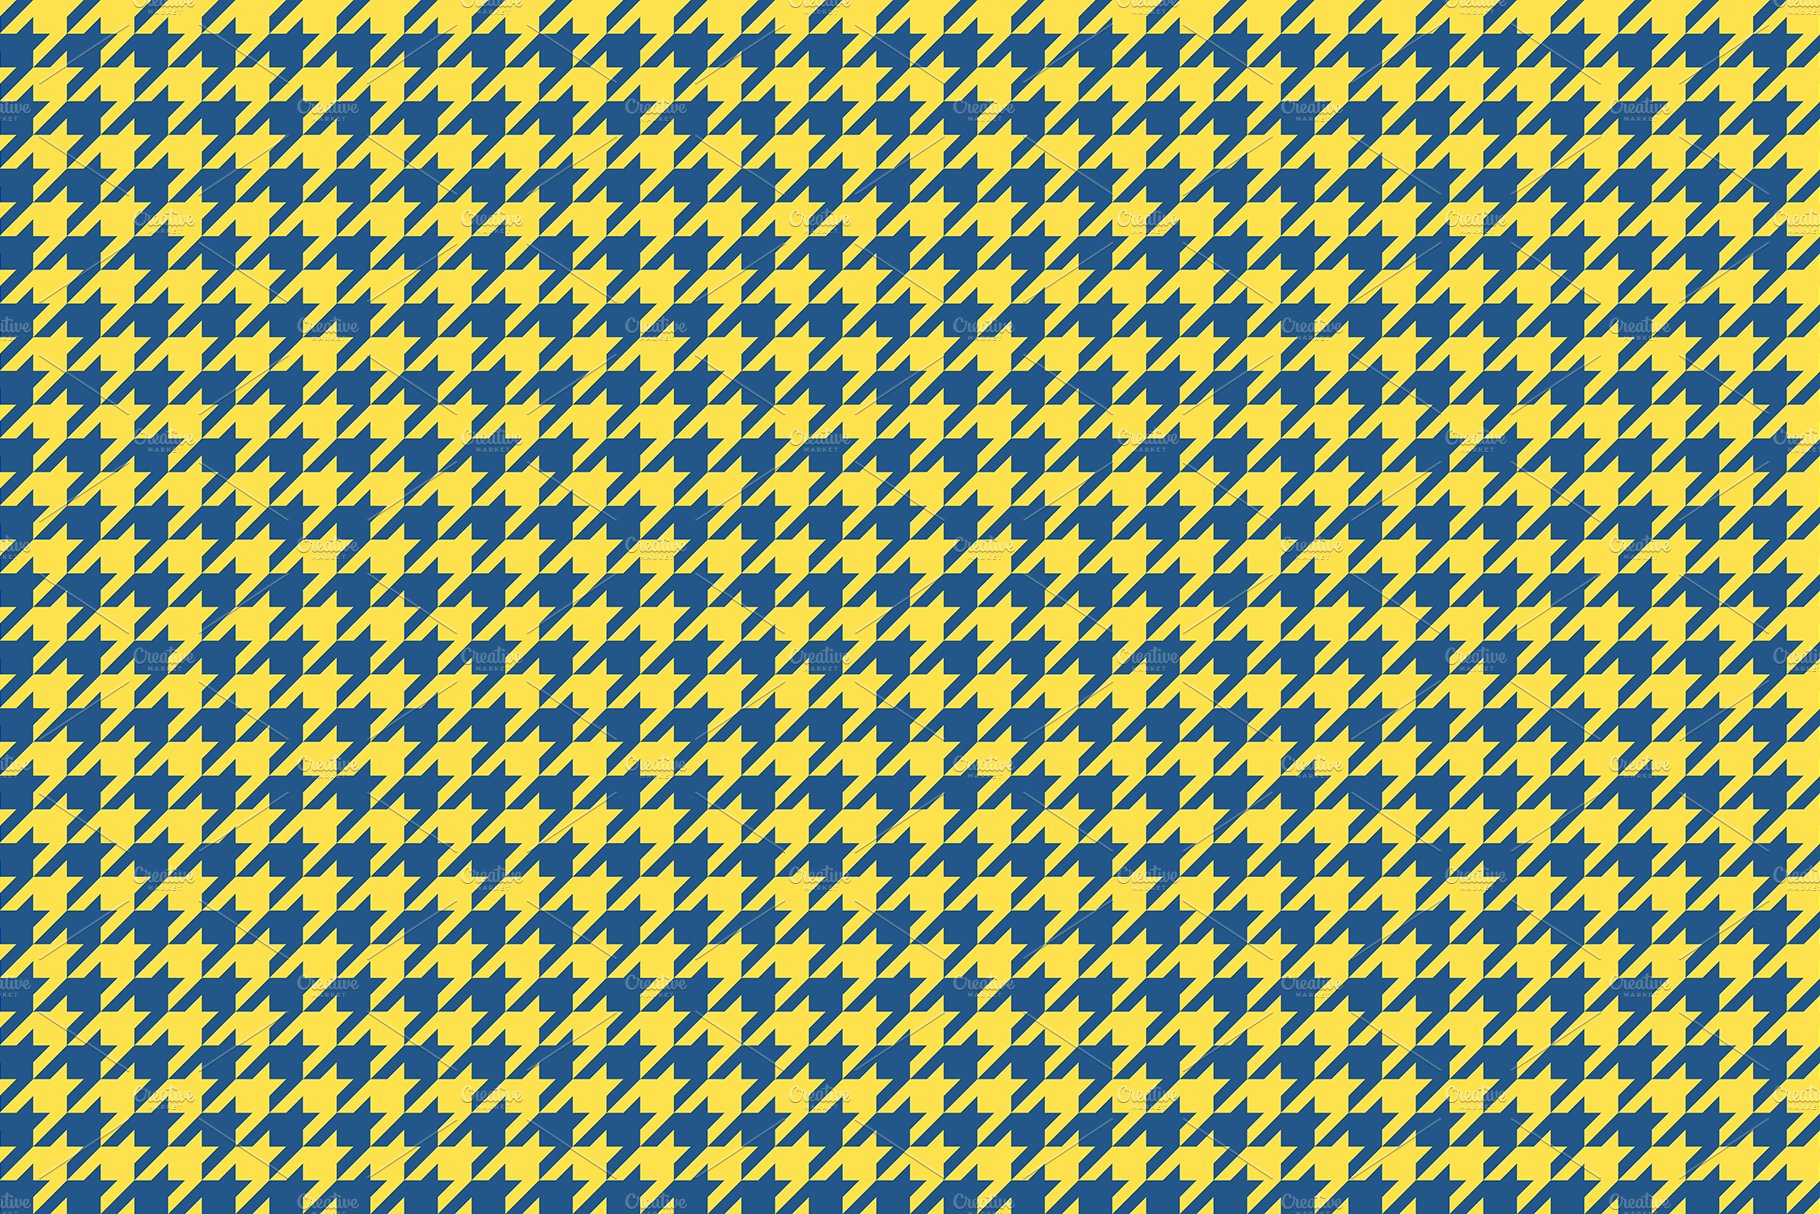 20 Houndstooth Pattern Background Textures By Textures & Overlays Store